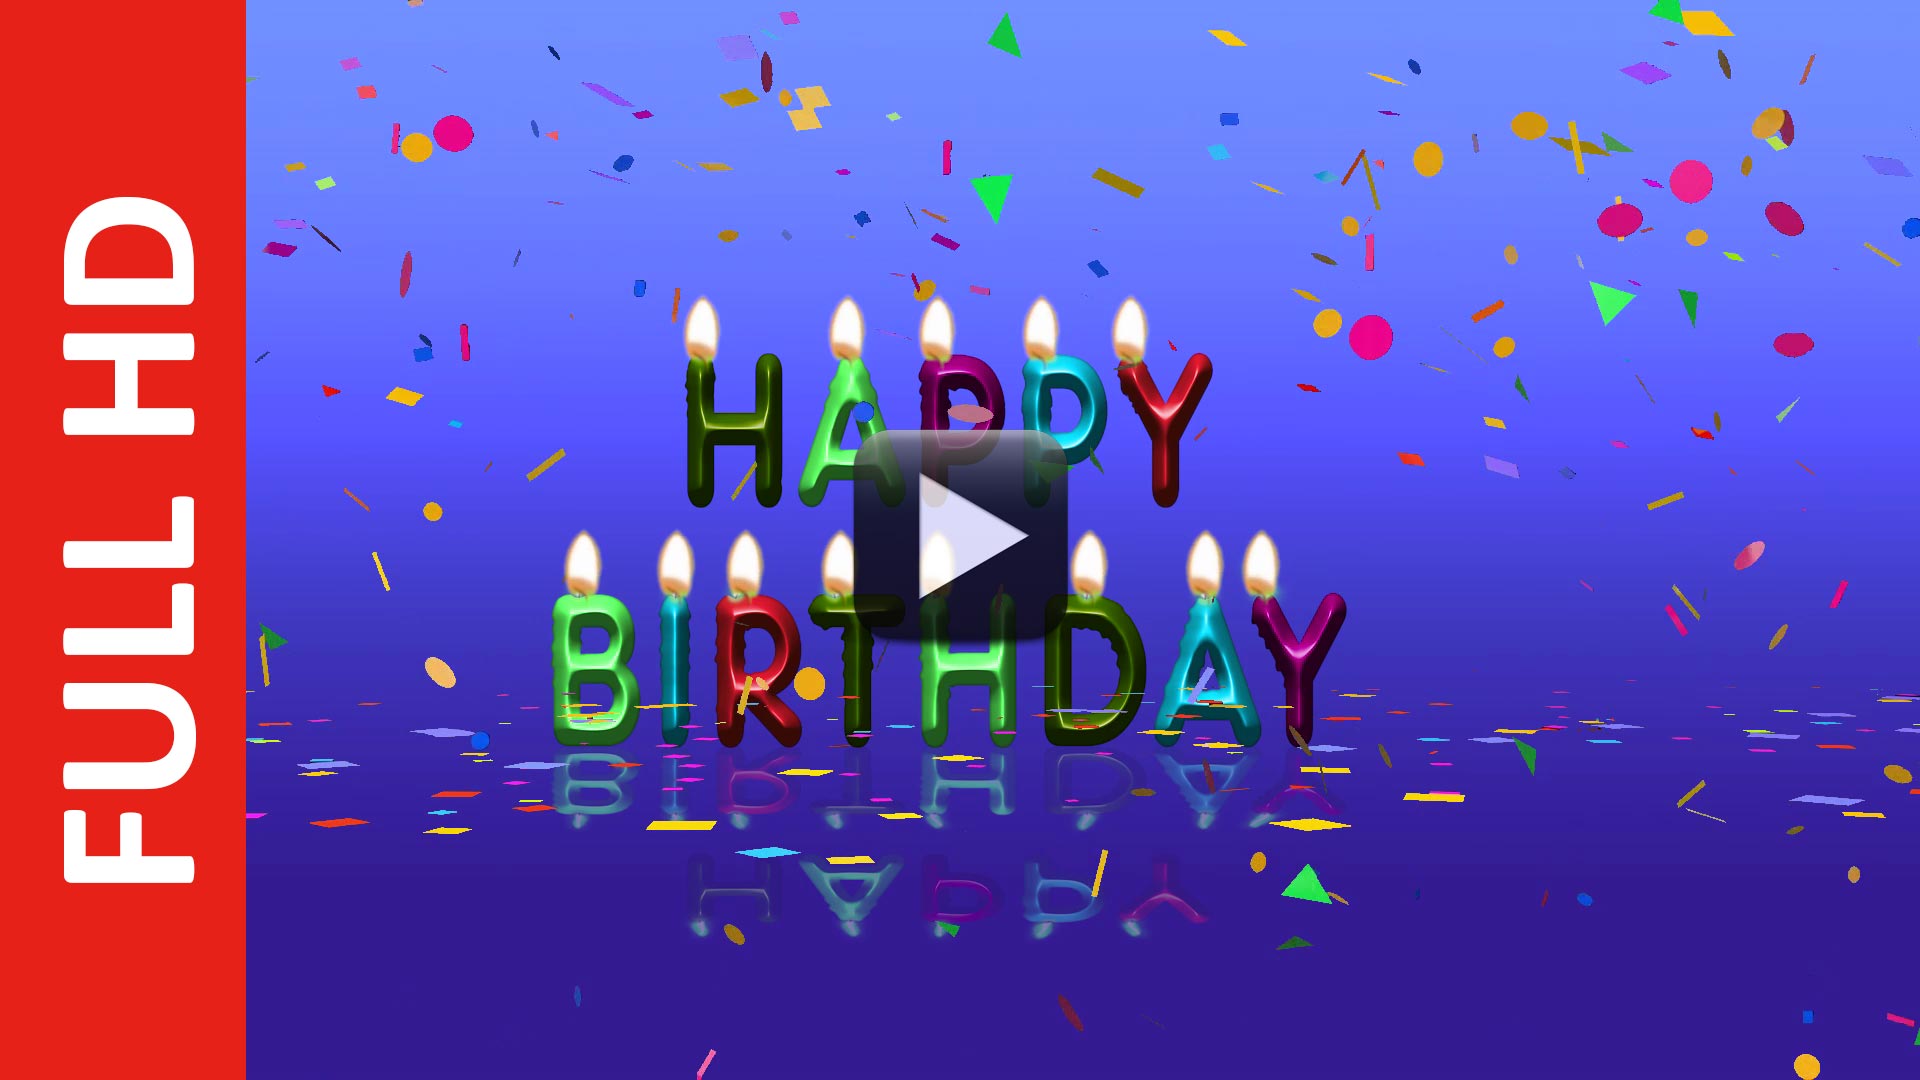 Colorful Happy Birthday Animation Video Free Download | All Design Creative